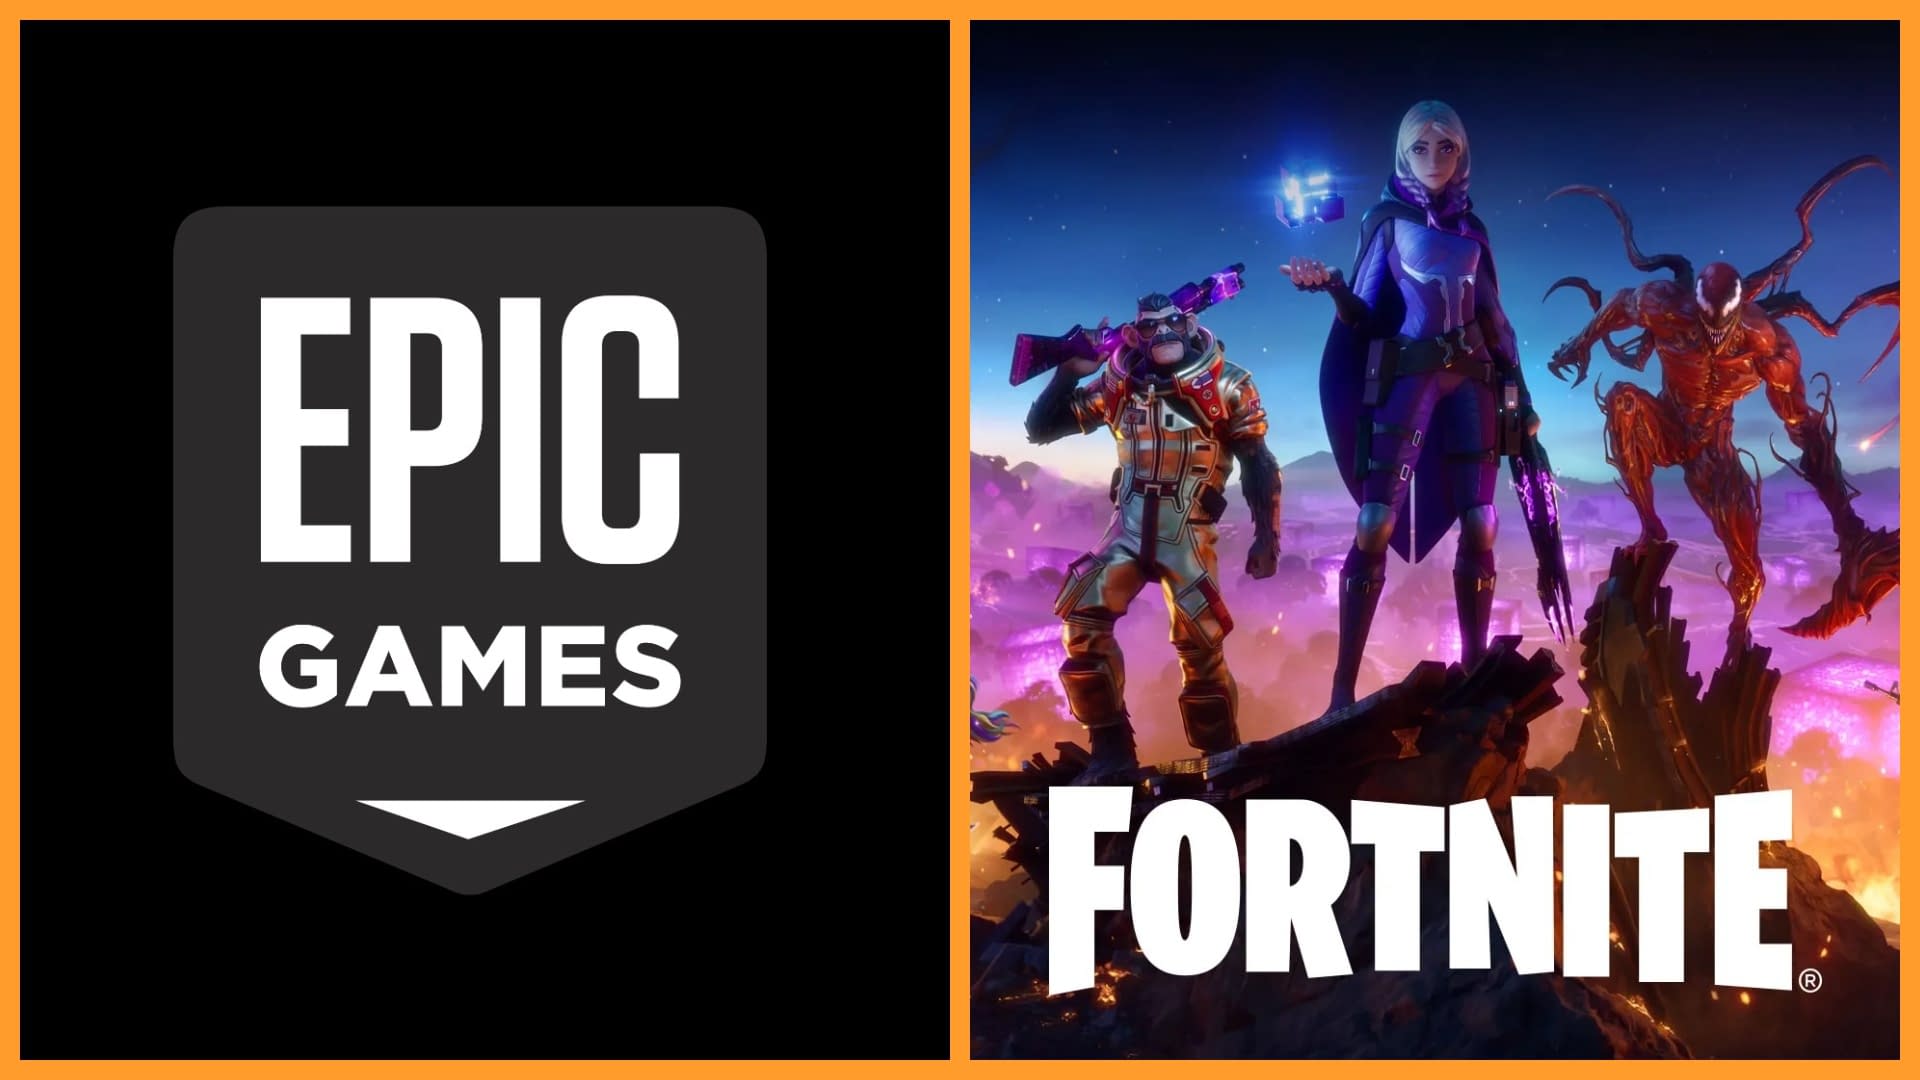 For Fortnite to Epic Games, $25 million dollars were fined!